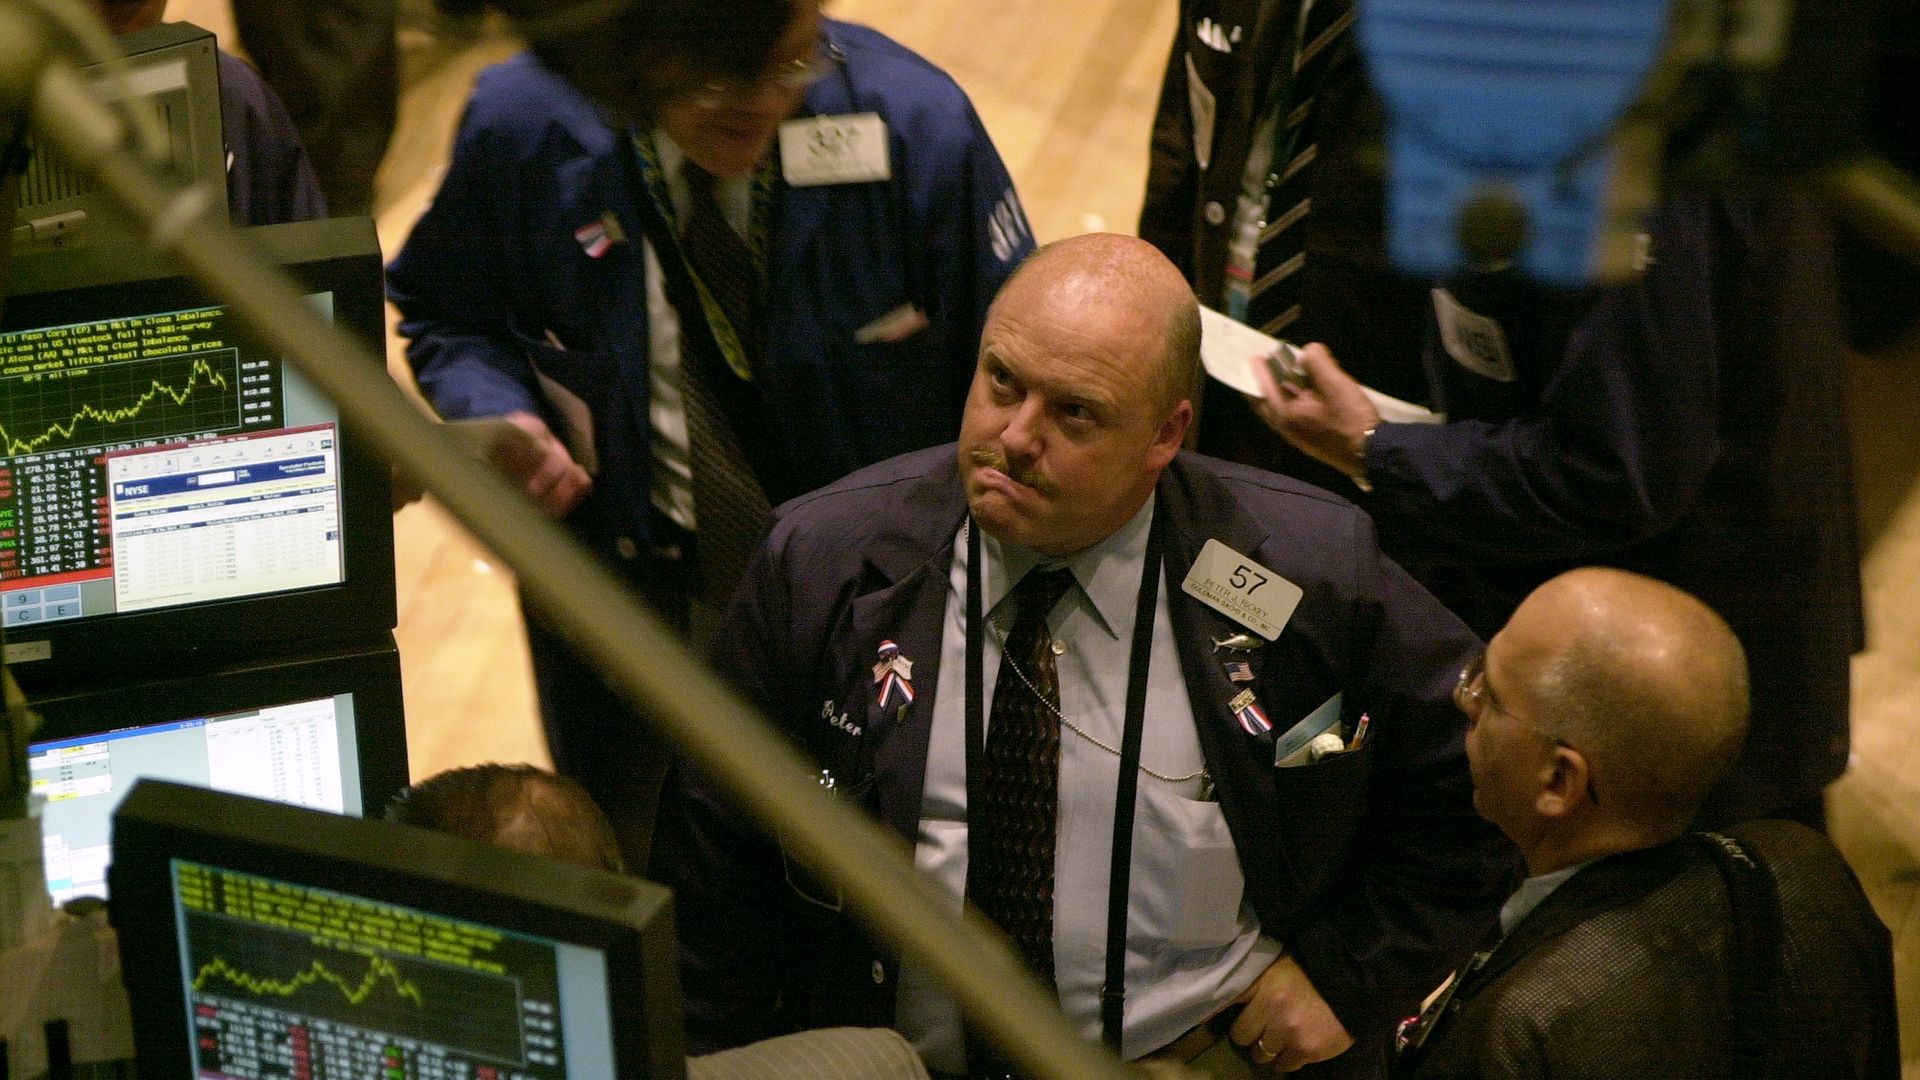 A trader on the floor of the exchange.